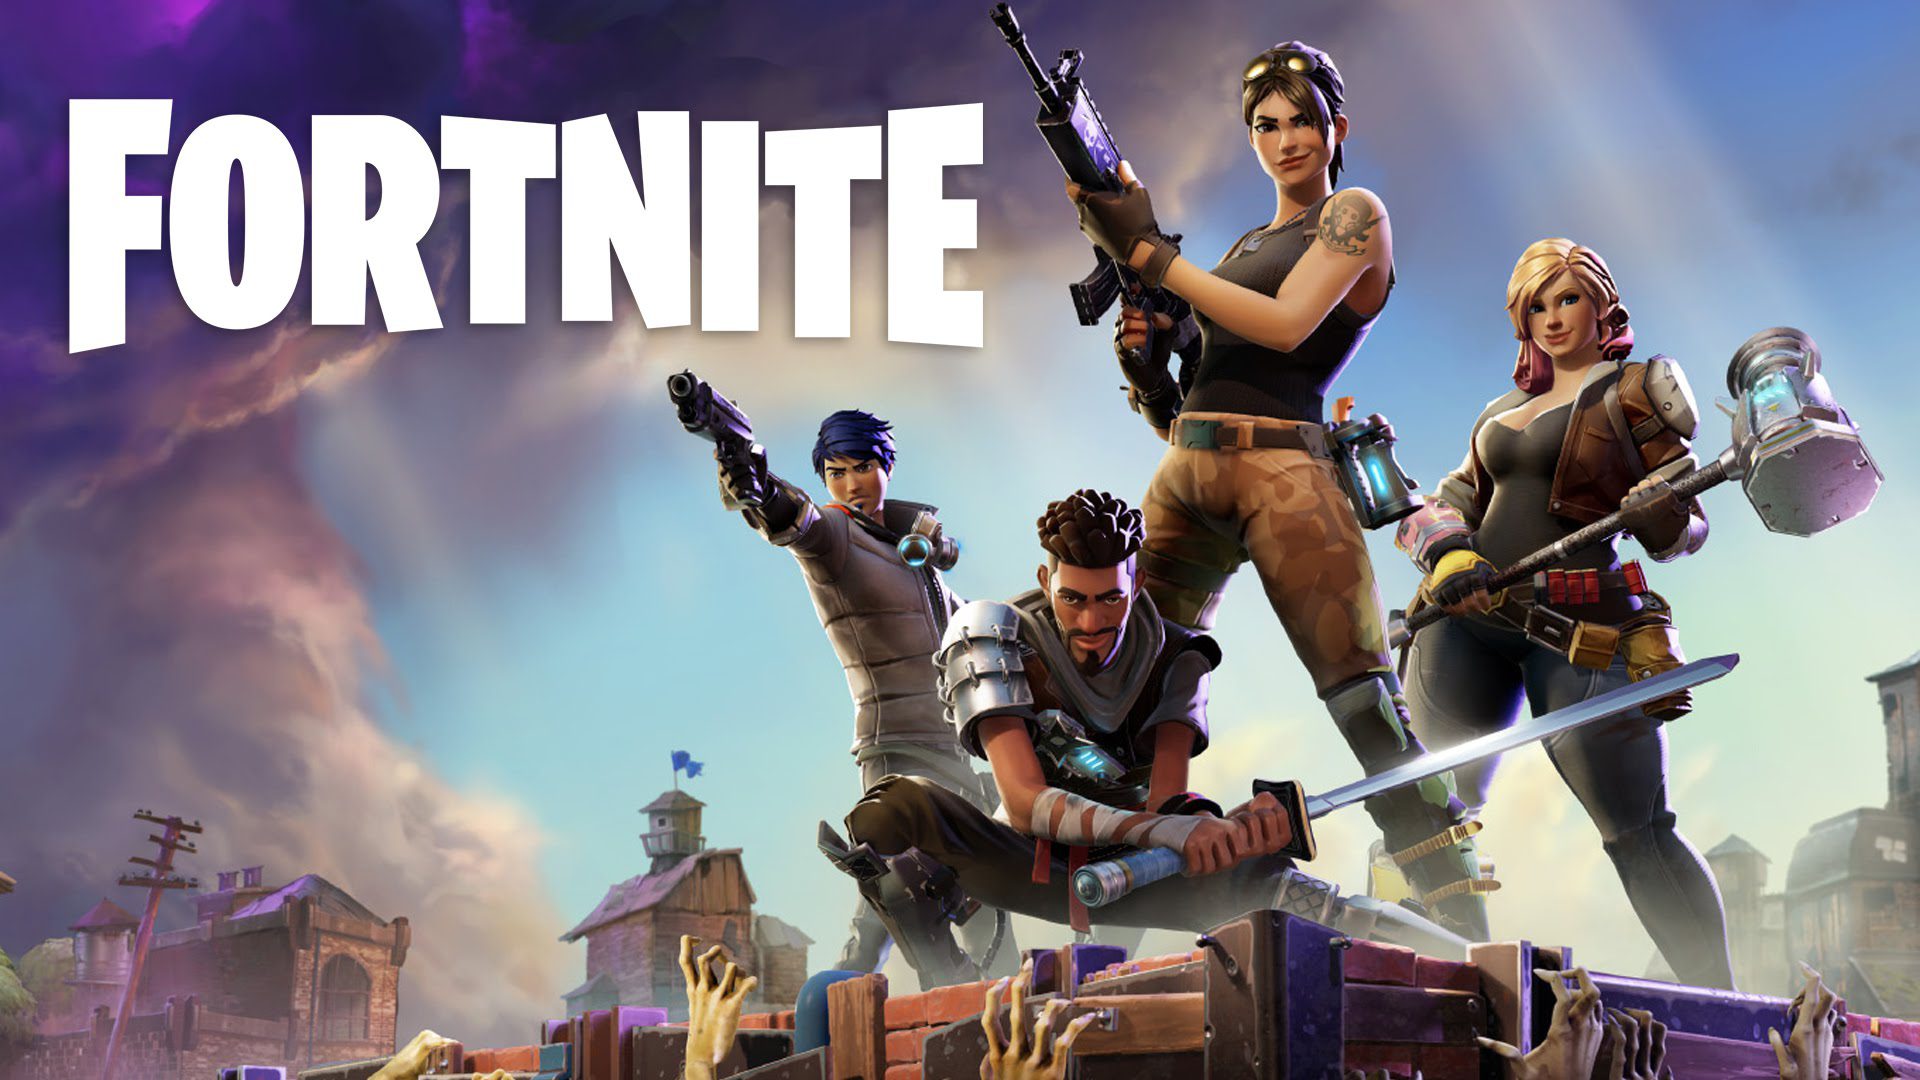 Epic Sues 14-year-old for Cheating in Fortnite; Mother Responds